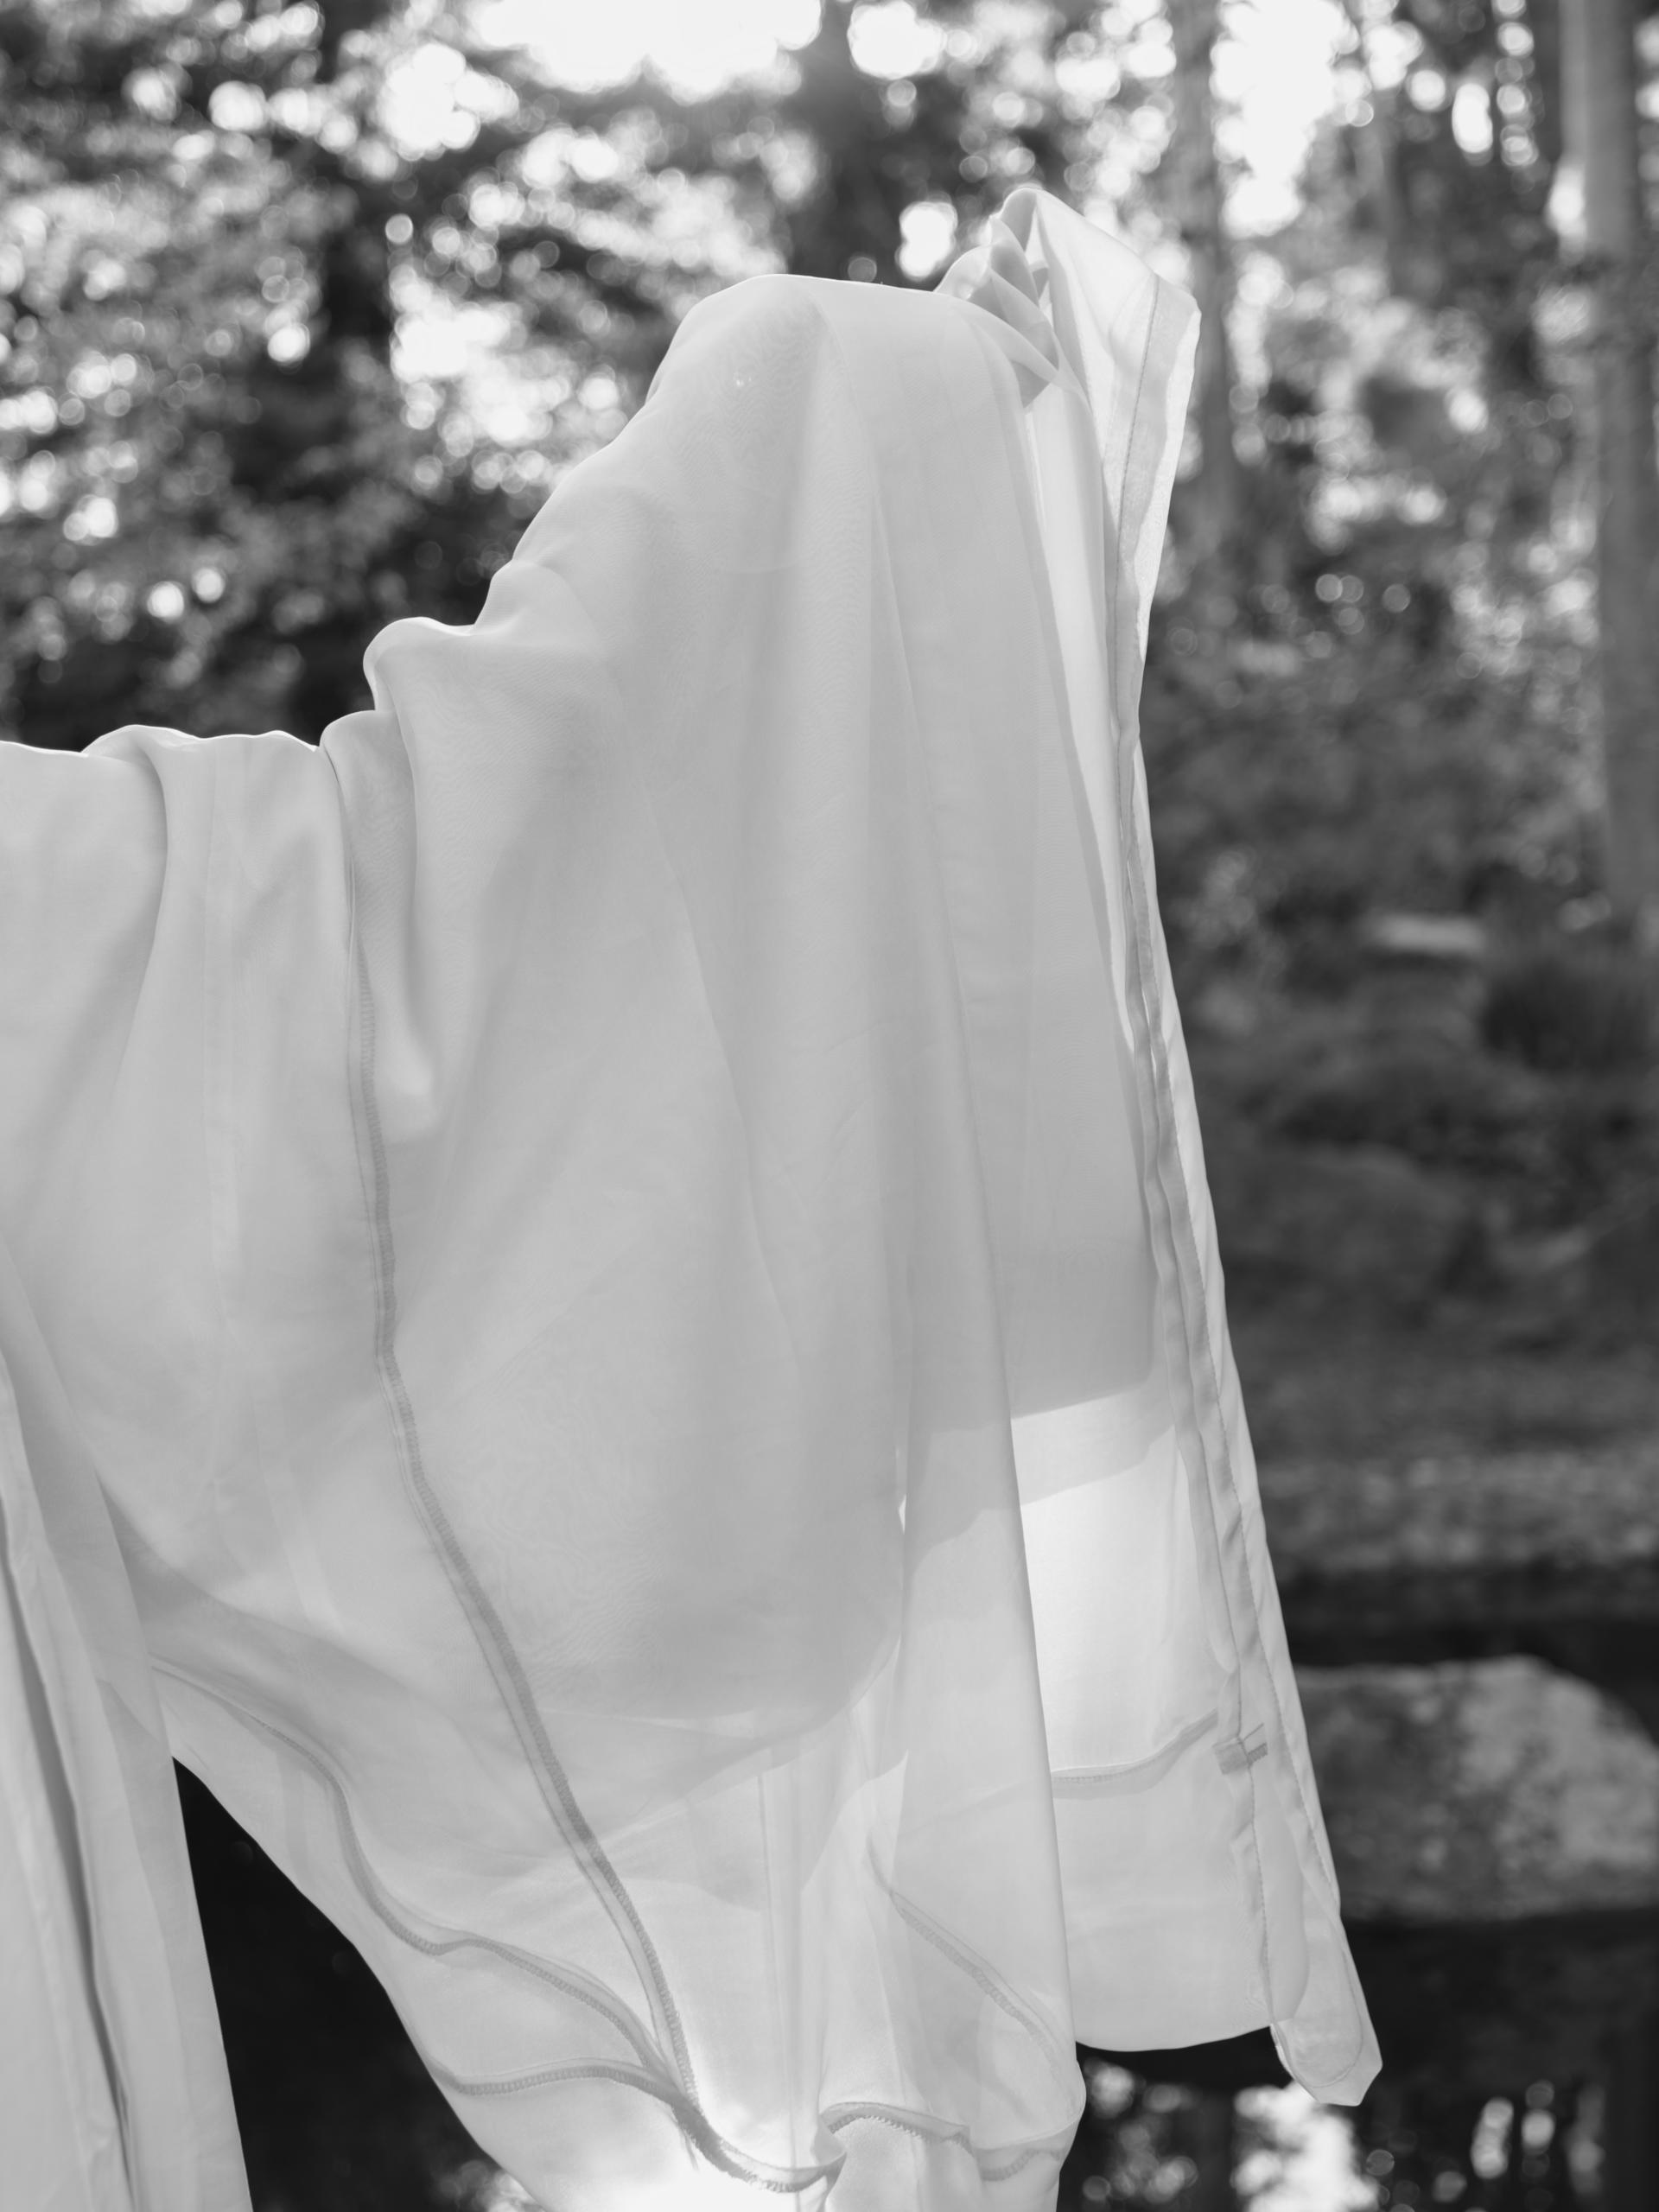 A partial of a figure wearing white silk